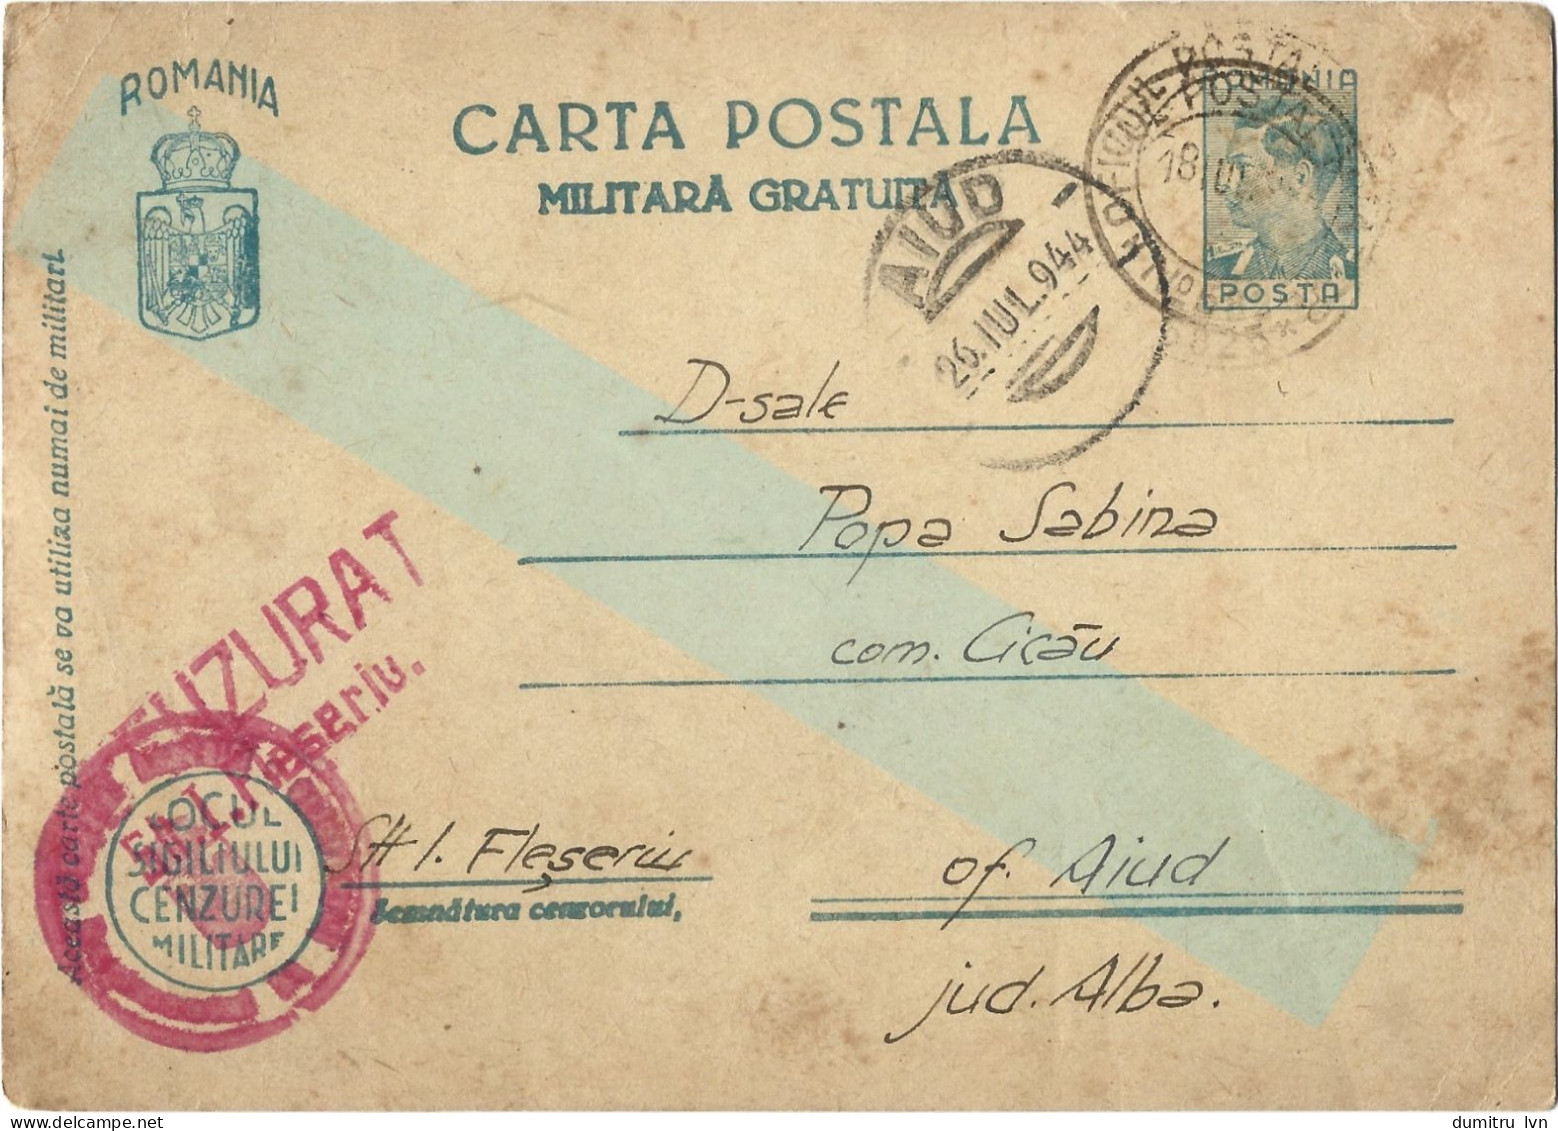 ROMANIA 1944 FREE MILITARY POSTCARD, MILITARY CENSORED, OPM 5825, POSTCARD STATIONERY - World War 2 Letters